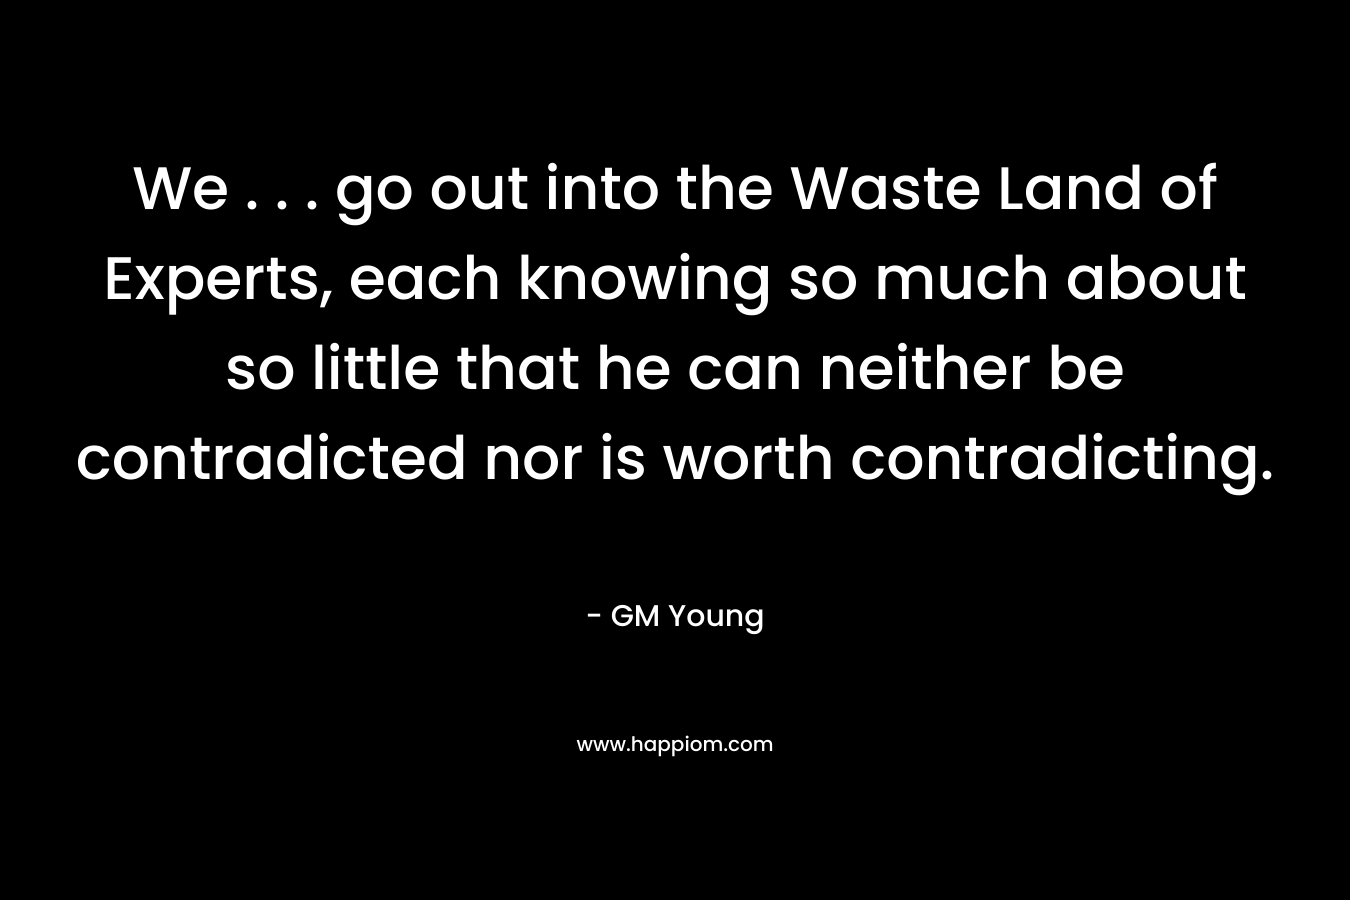 We . . . go out into the Waste Land of Experts, each knowing so much about so little that he can neither be contradicted nor is worth contradicting. – GM Young